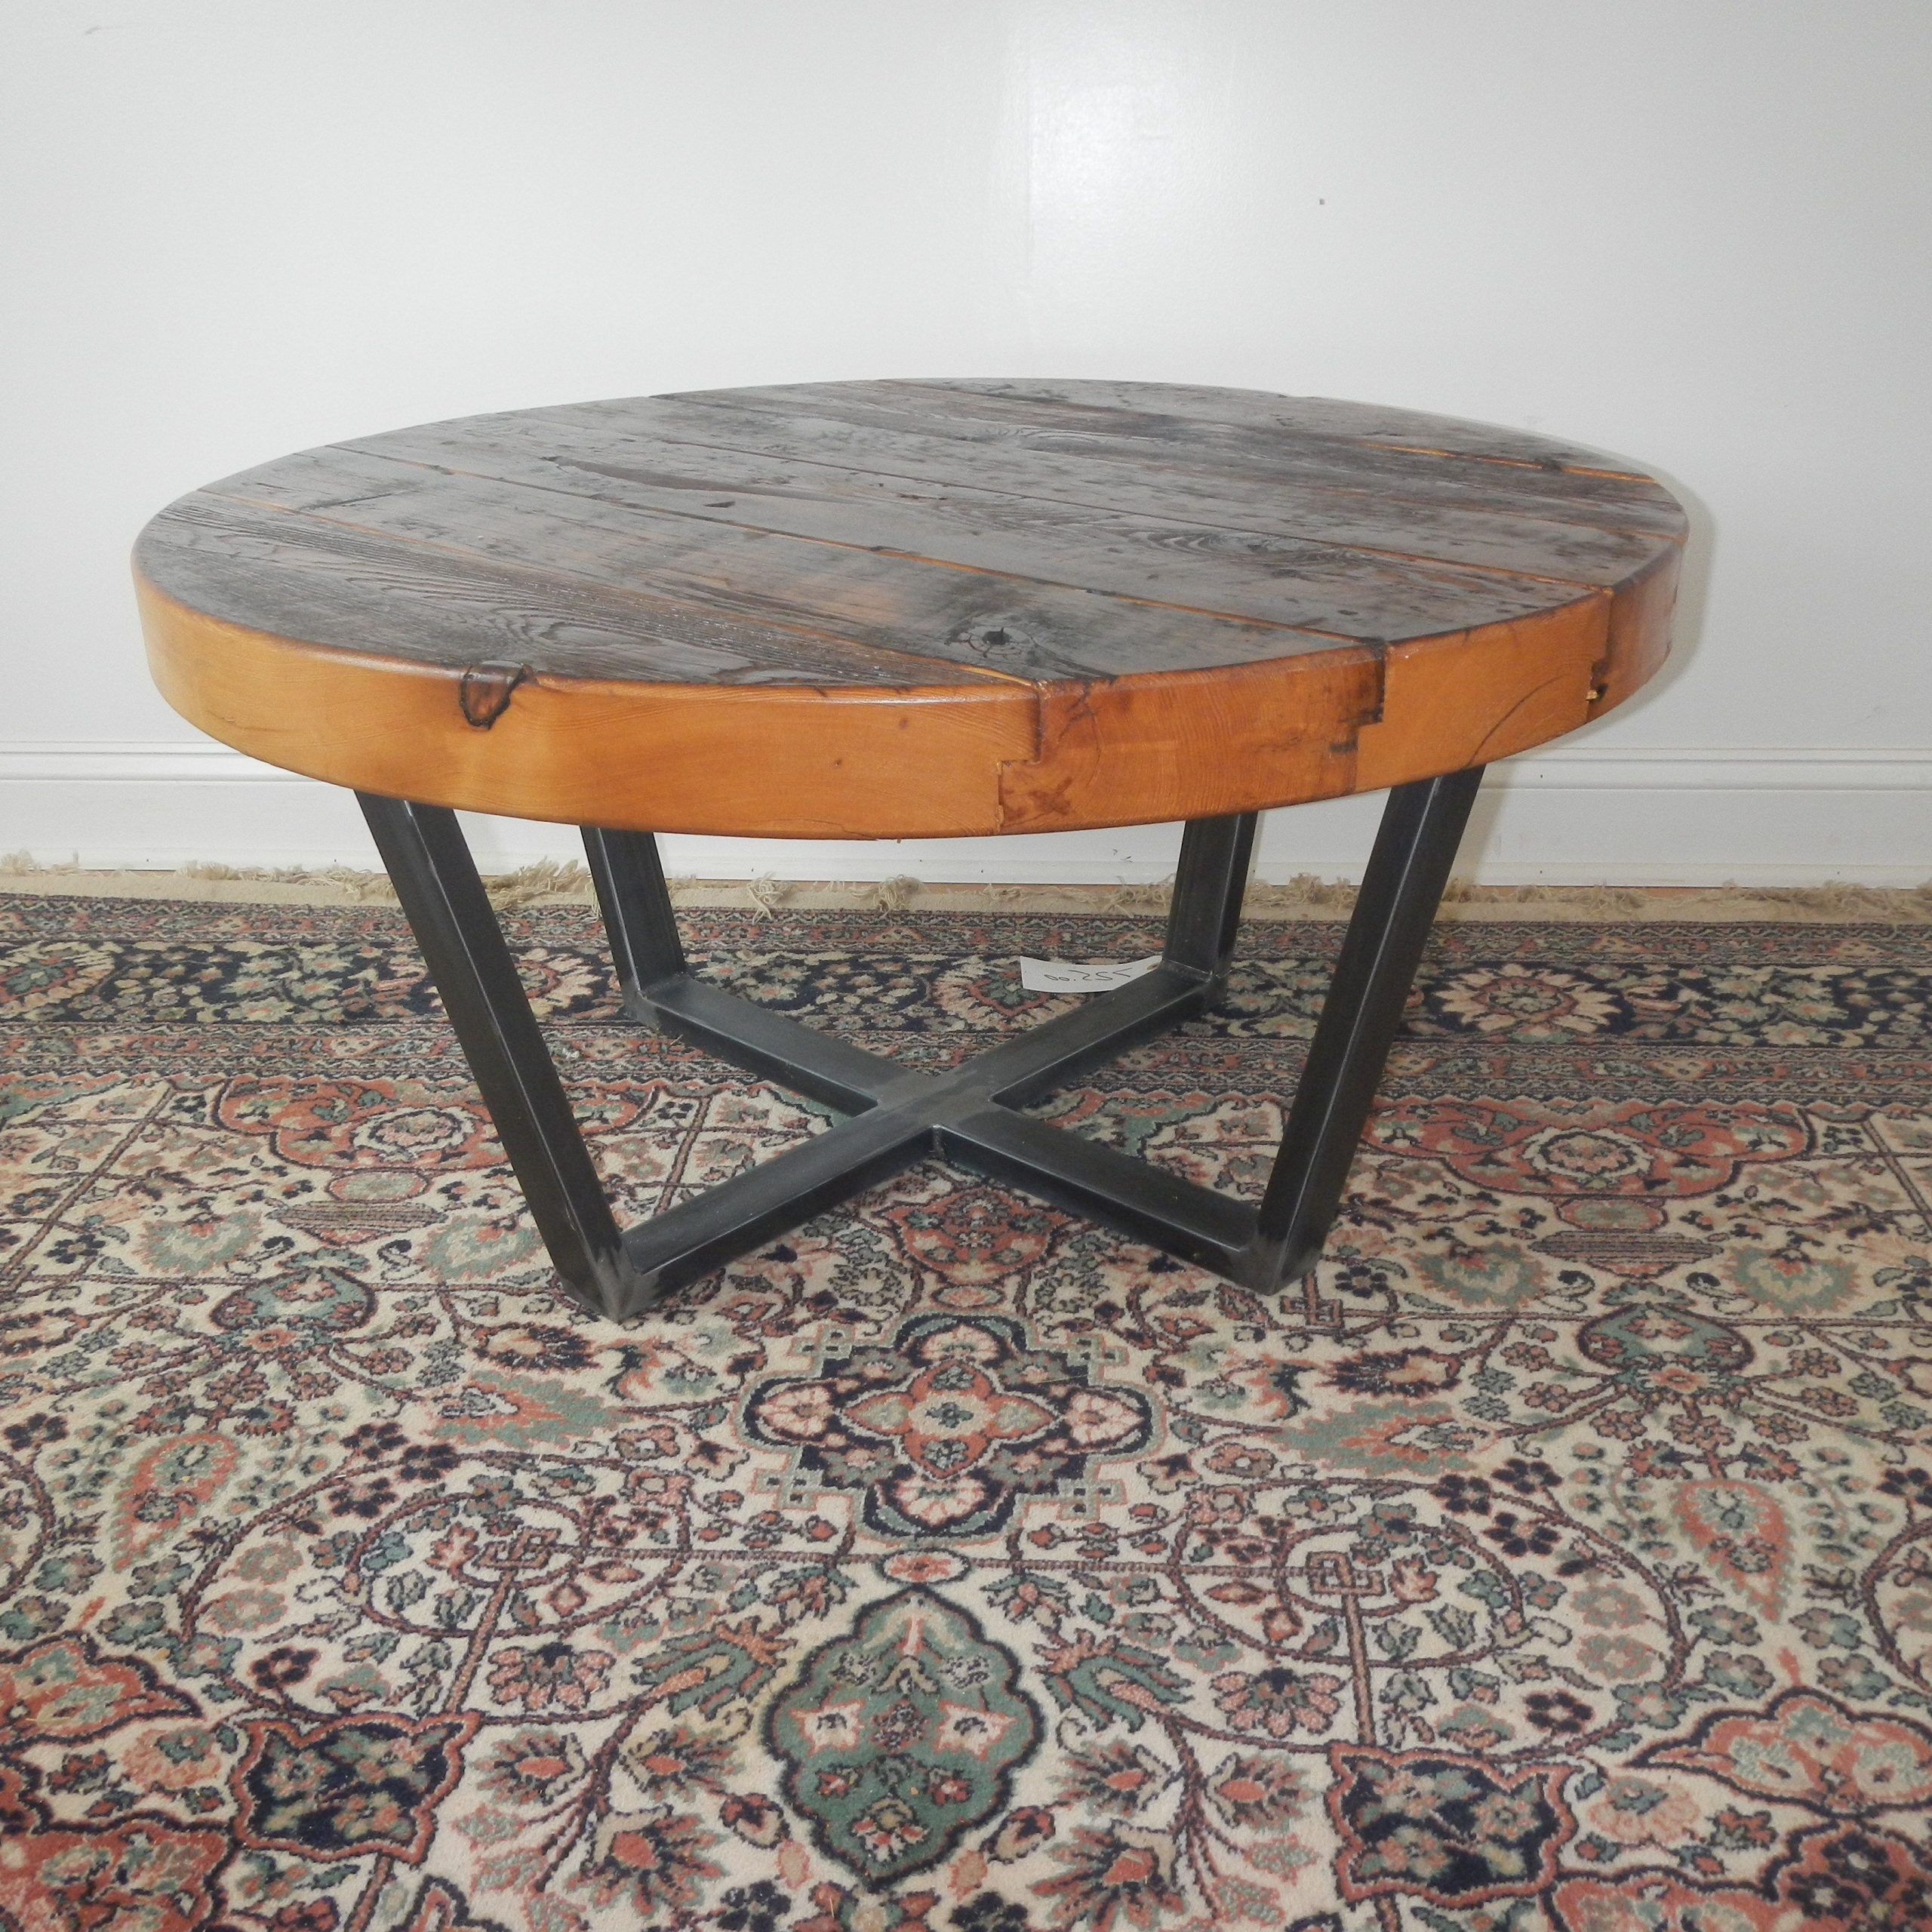 Newest Custom Made Reclaimed Wood And Welded Steel Round Coffee Tabledon In Round Coffee Tables With Steel Frames (View 7 of 15)